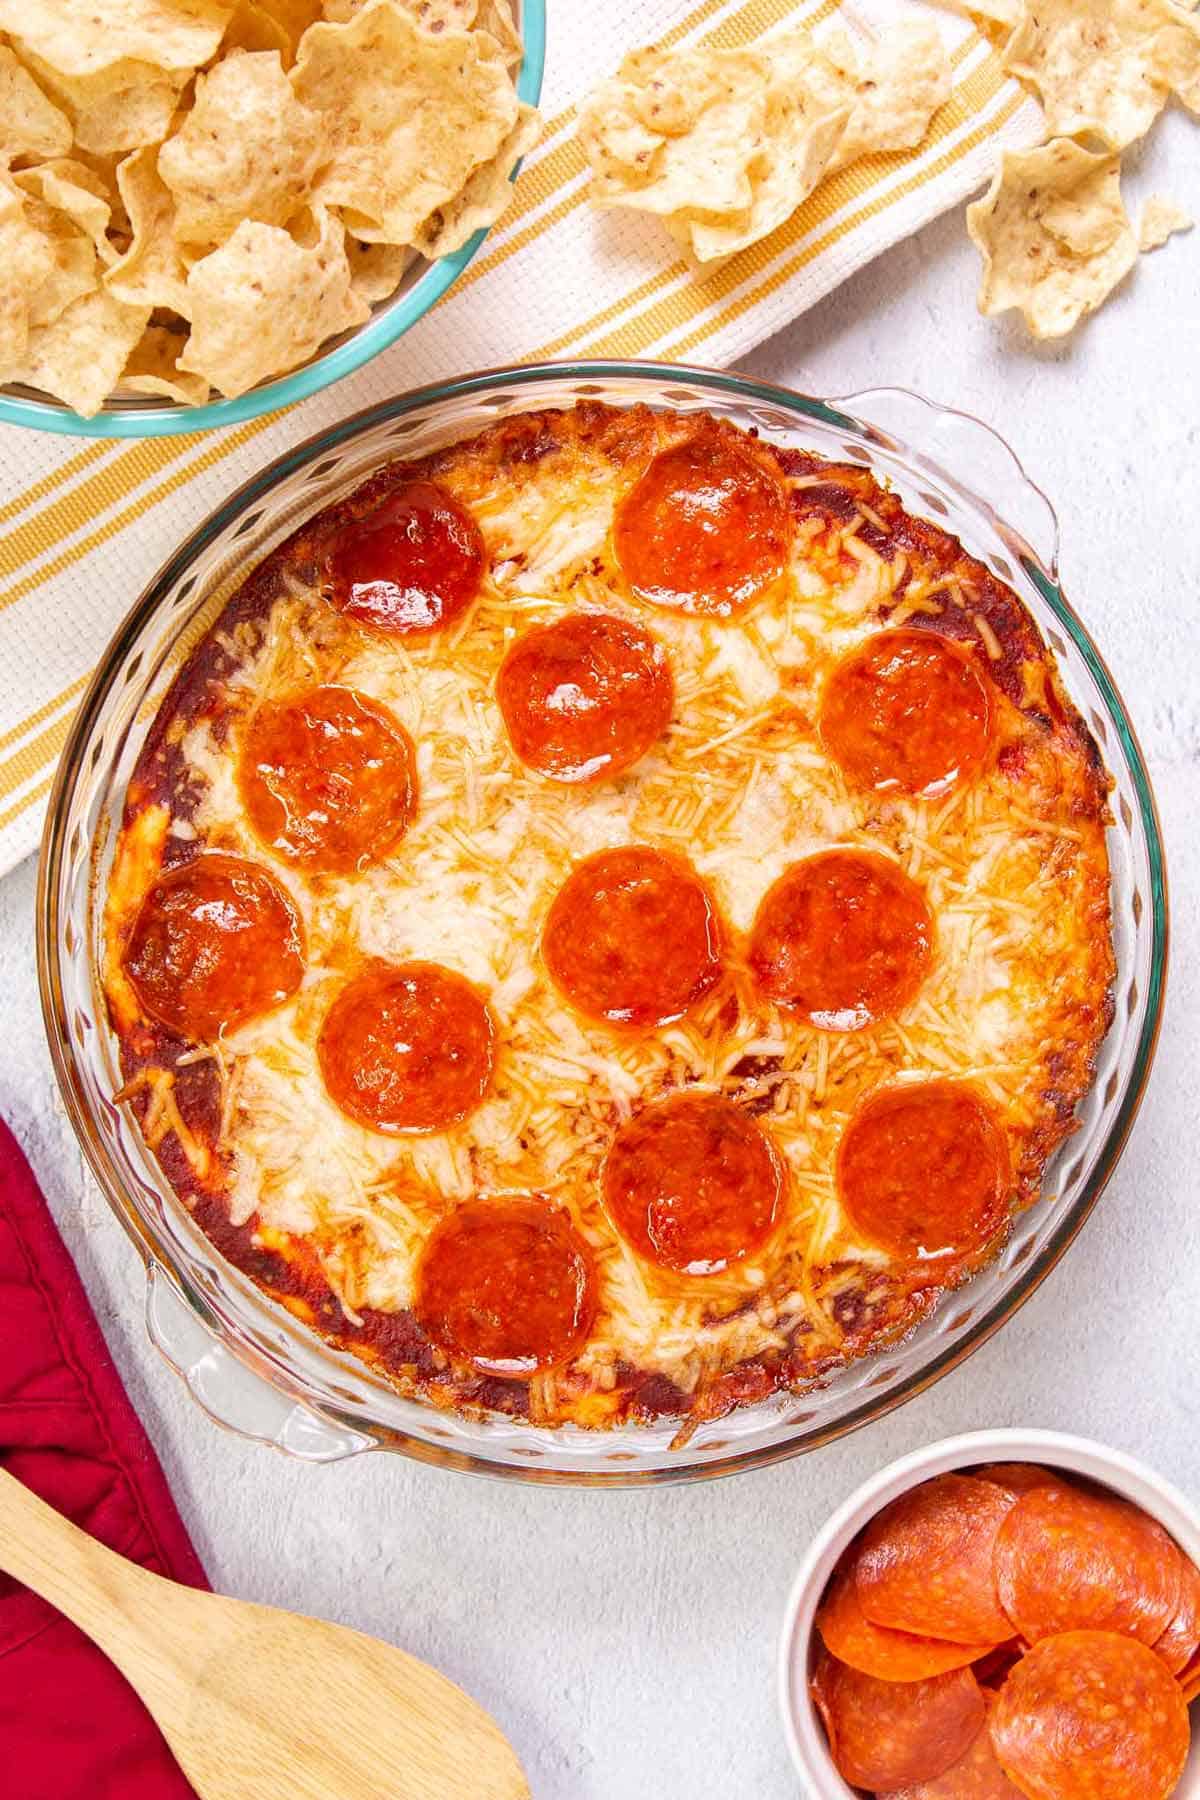 Top down view of pizza dip baked in a pie plate. The dip is topped with pepperoni. A bowl of tortilla chips is in the bowl off to the side.